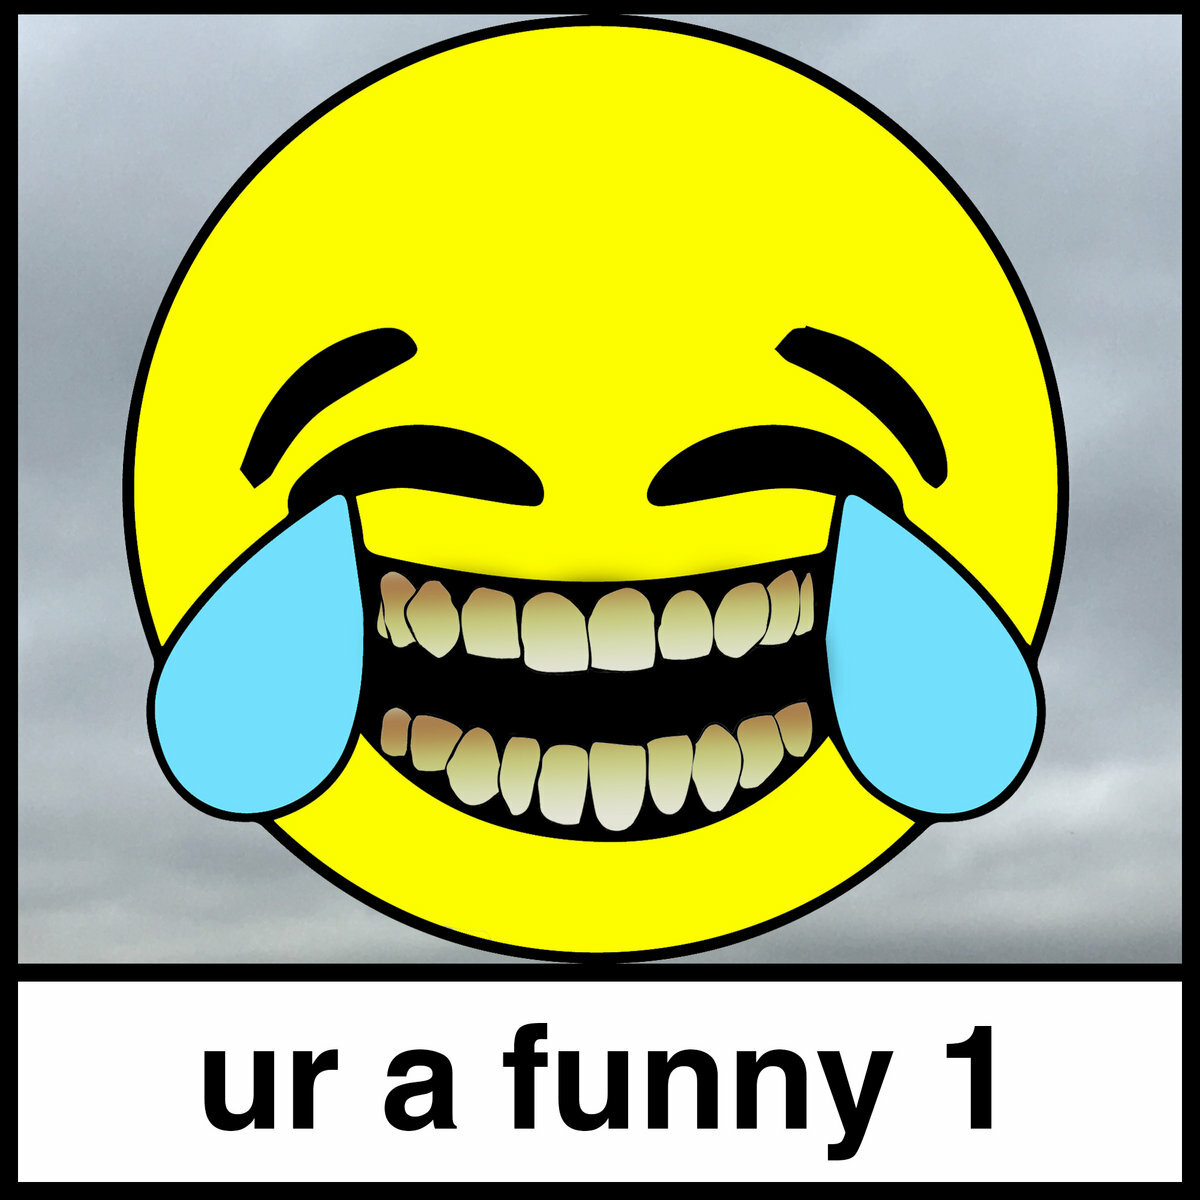 Giant laughing emoji with tears running from its eyes, huge human teeth and the words 'ur a funny 1' written beneath it.